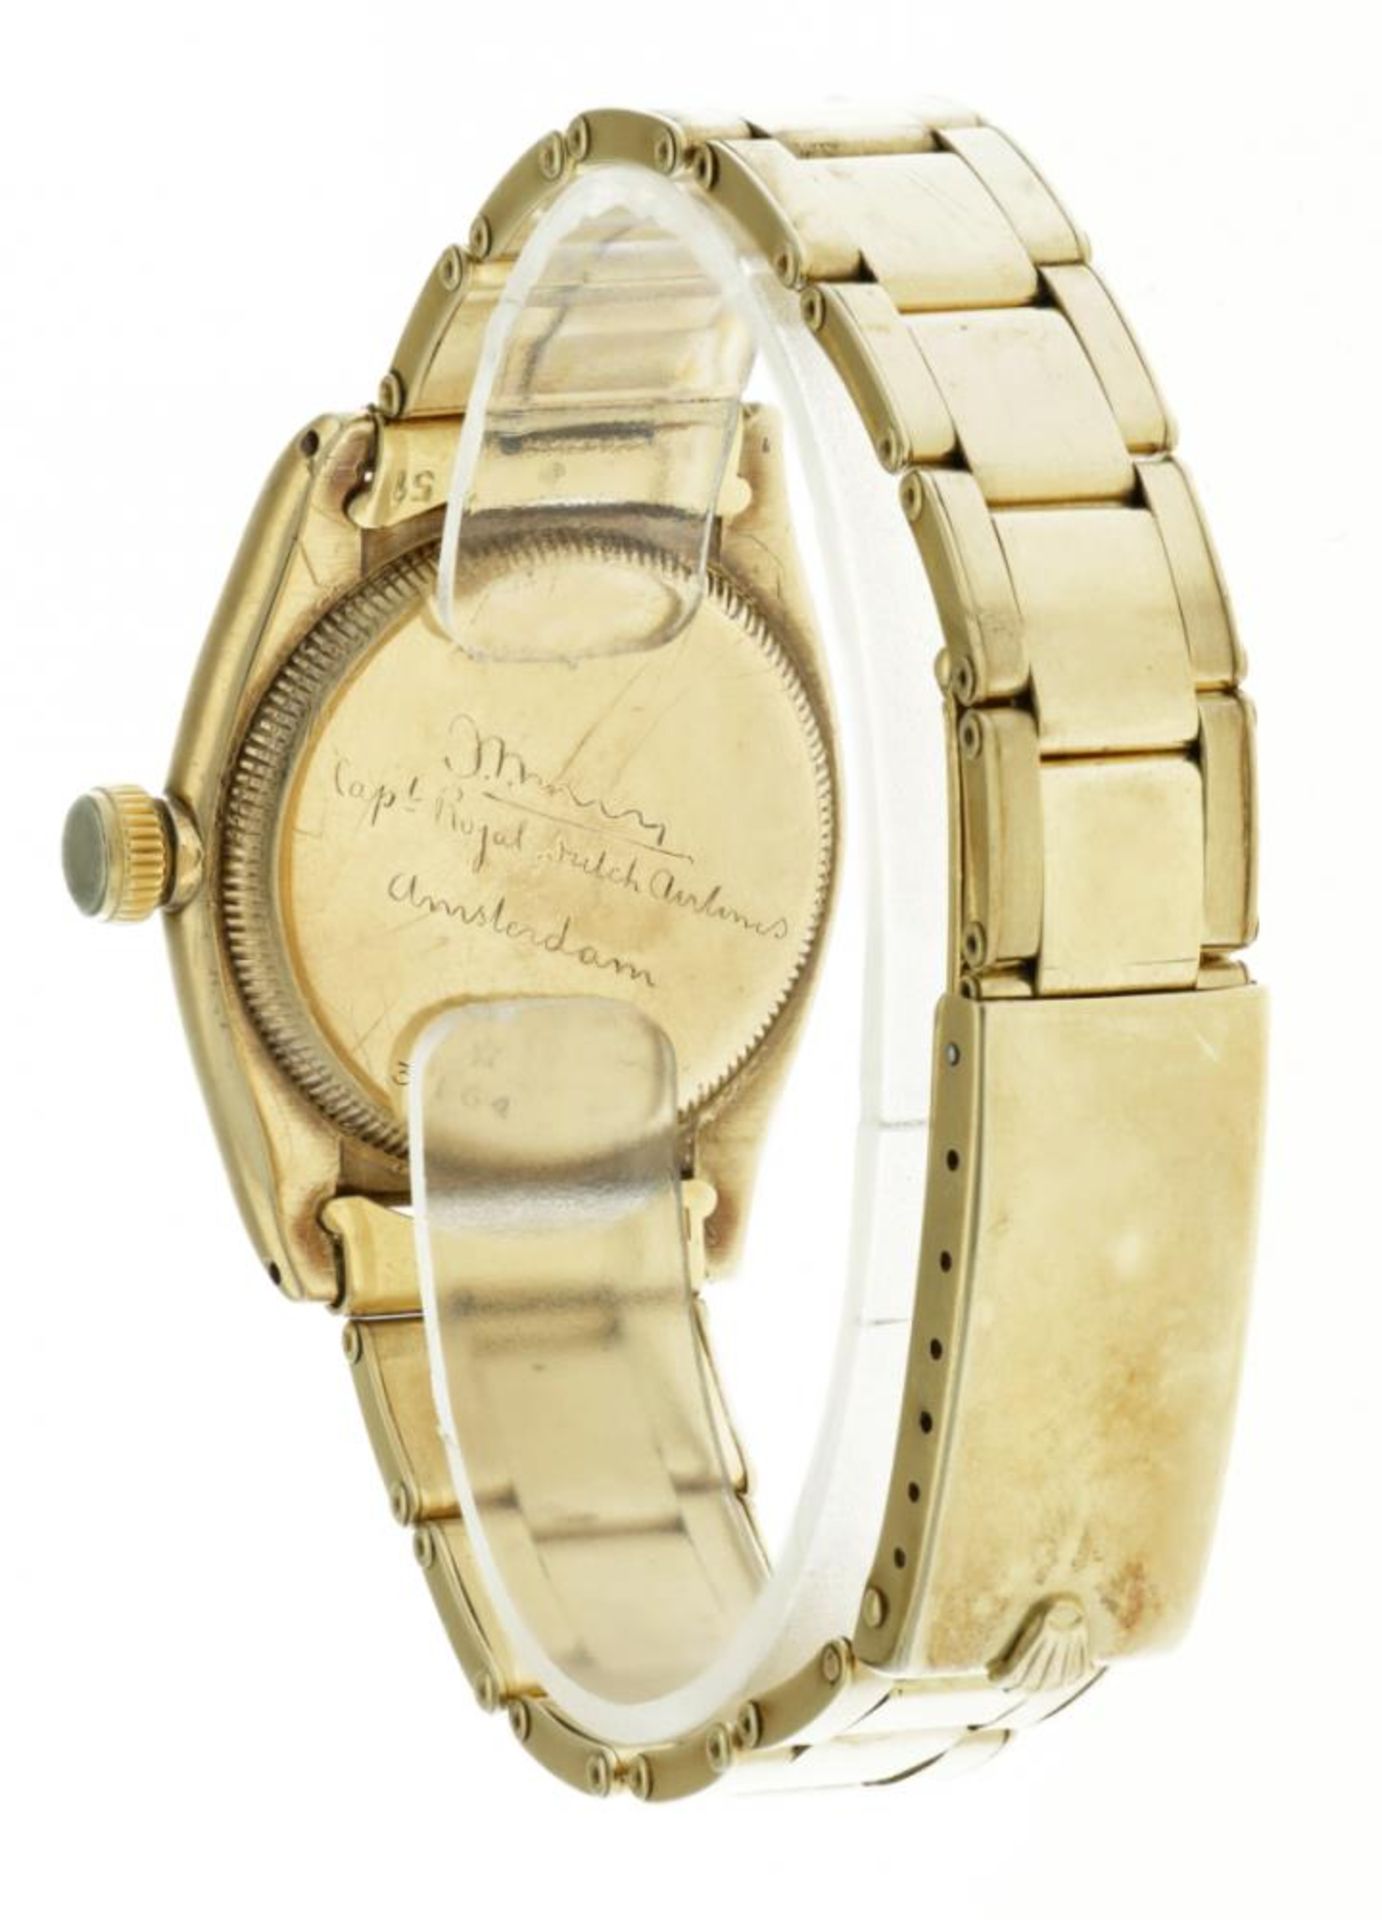 Rolex Oyster Royal - Men's watch - apprx. 1930. - Image 3 of 6